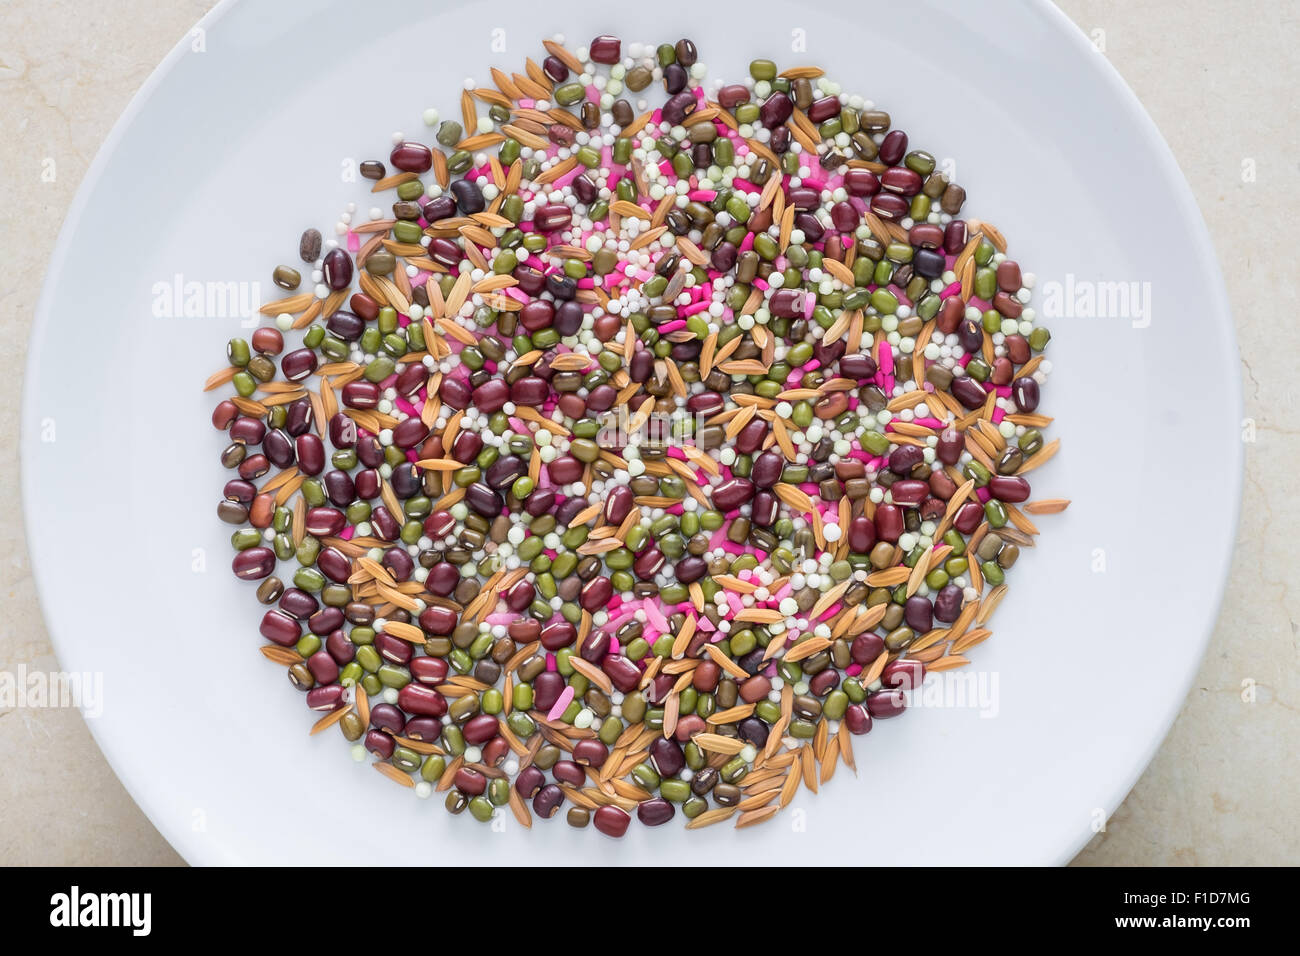 bean brown grain green hole middle paddy pink plate purple rice seed table violet white yellow mix Stock Photo